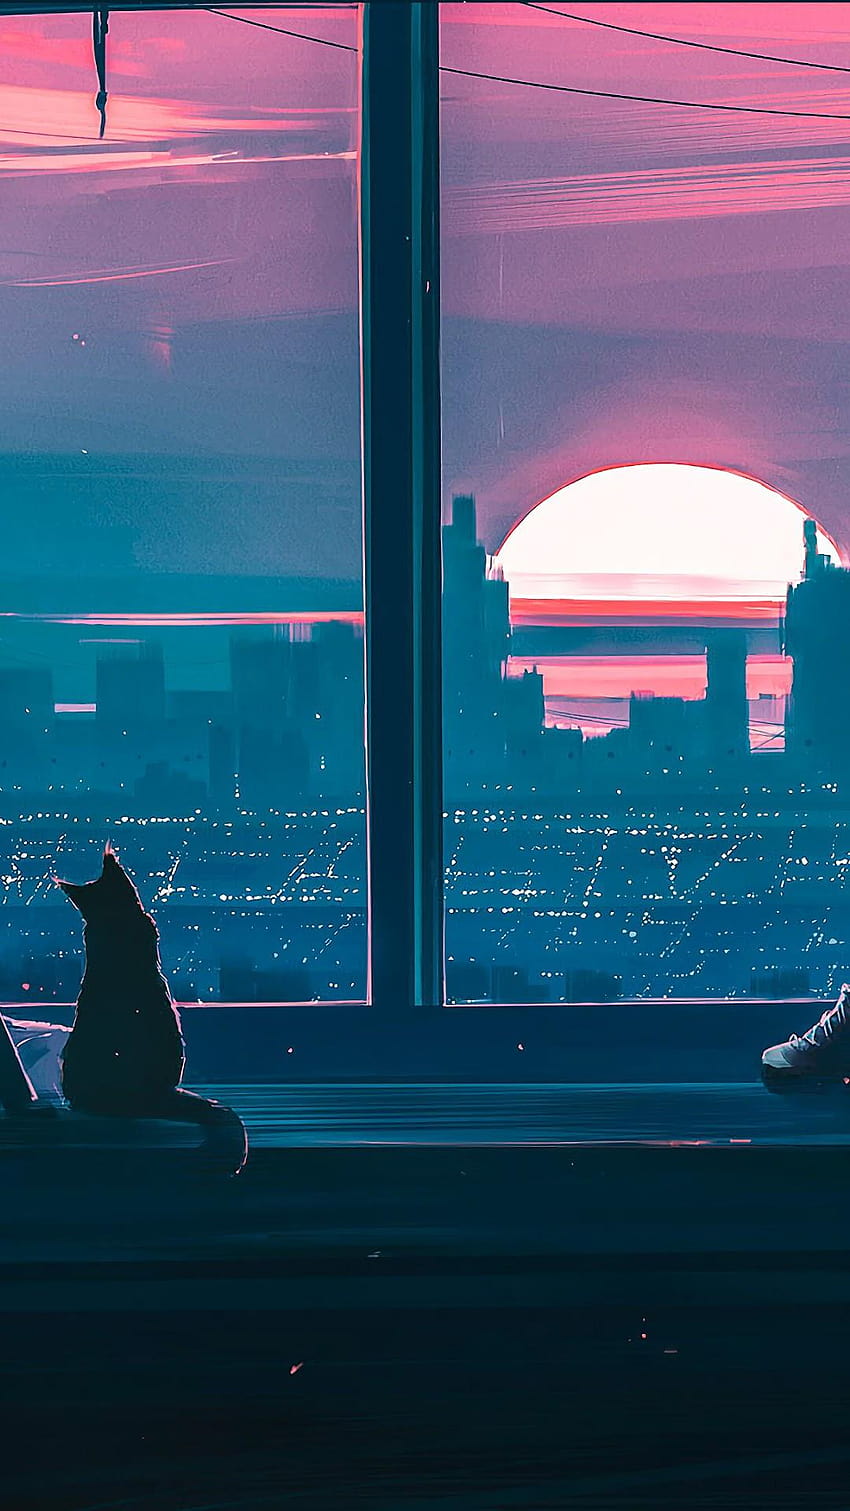 200+] Anime Cat Wallpapers | Wallpapers.com